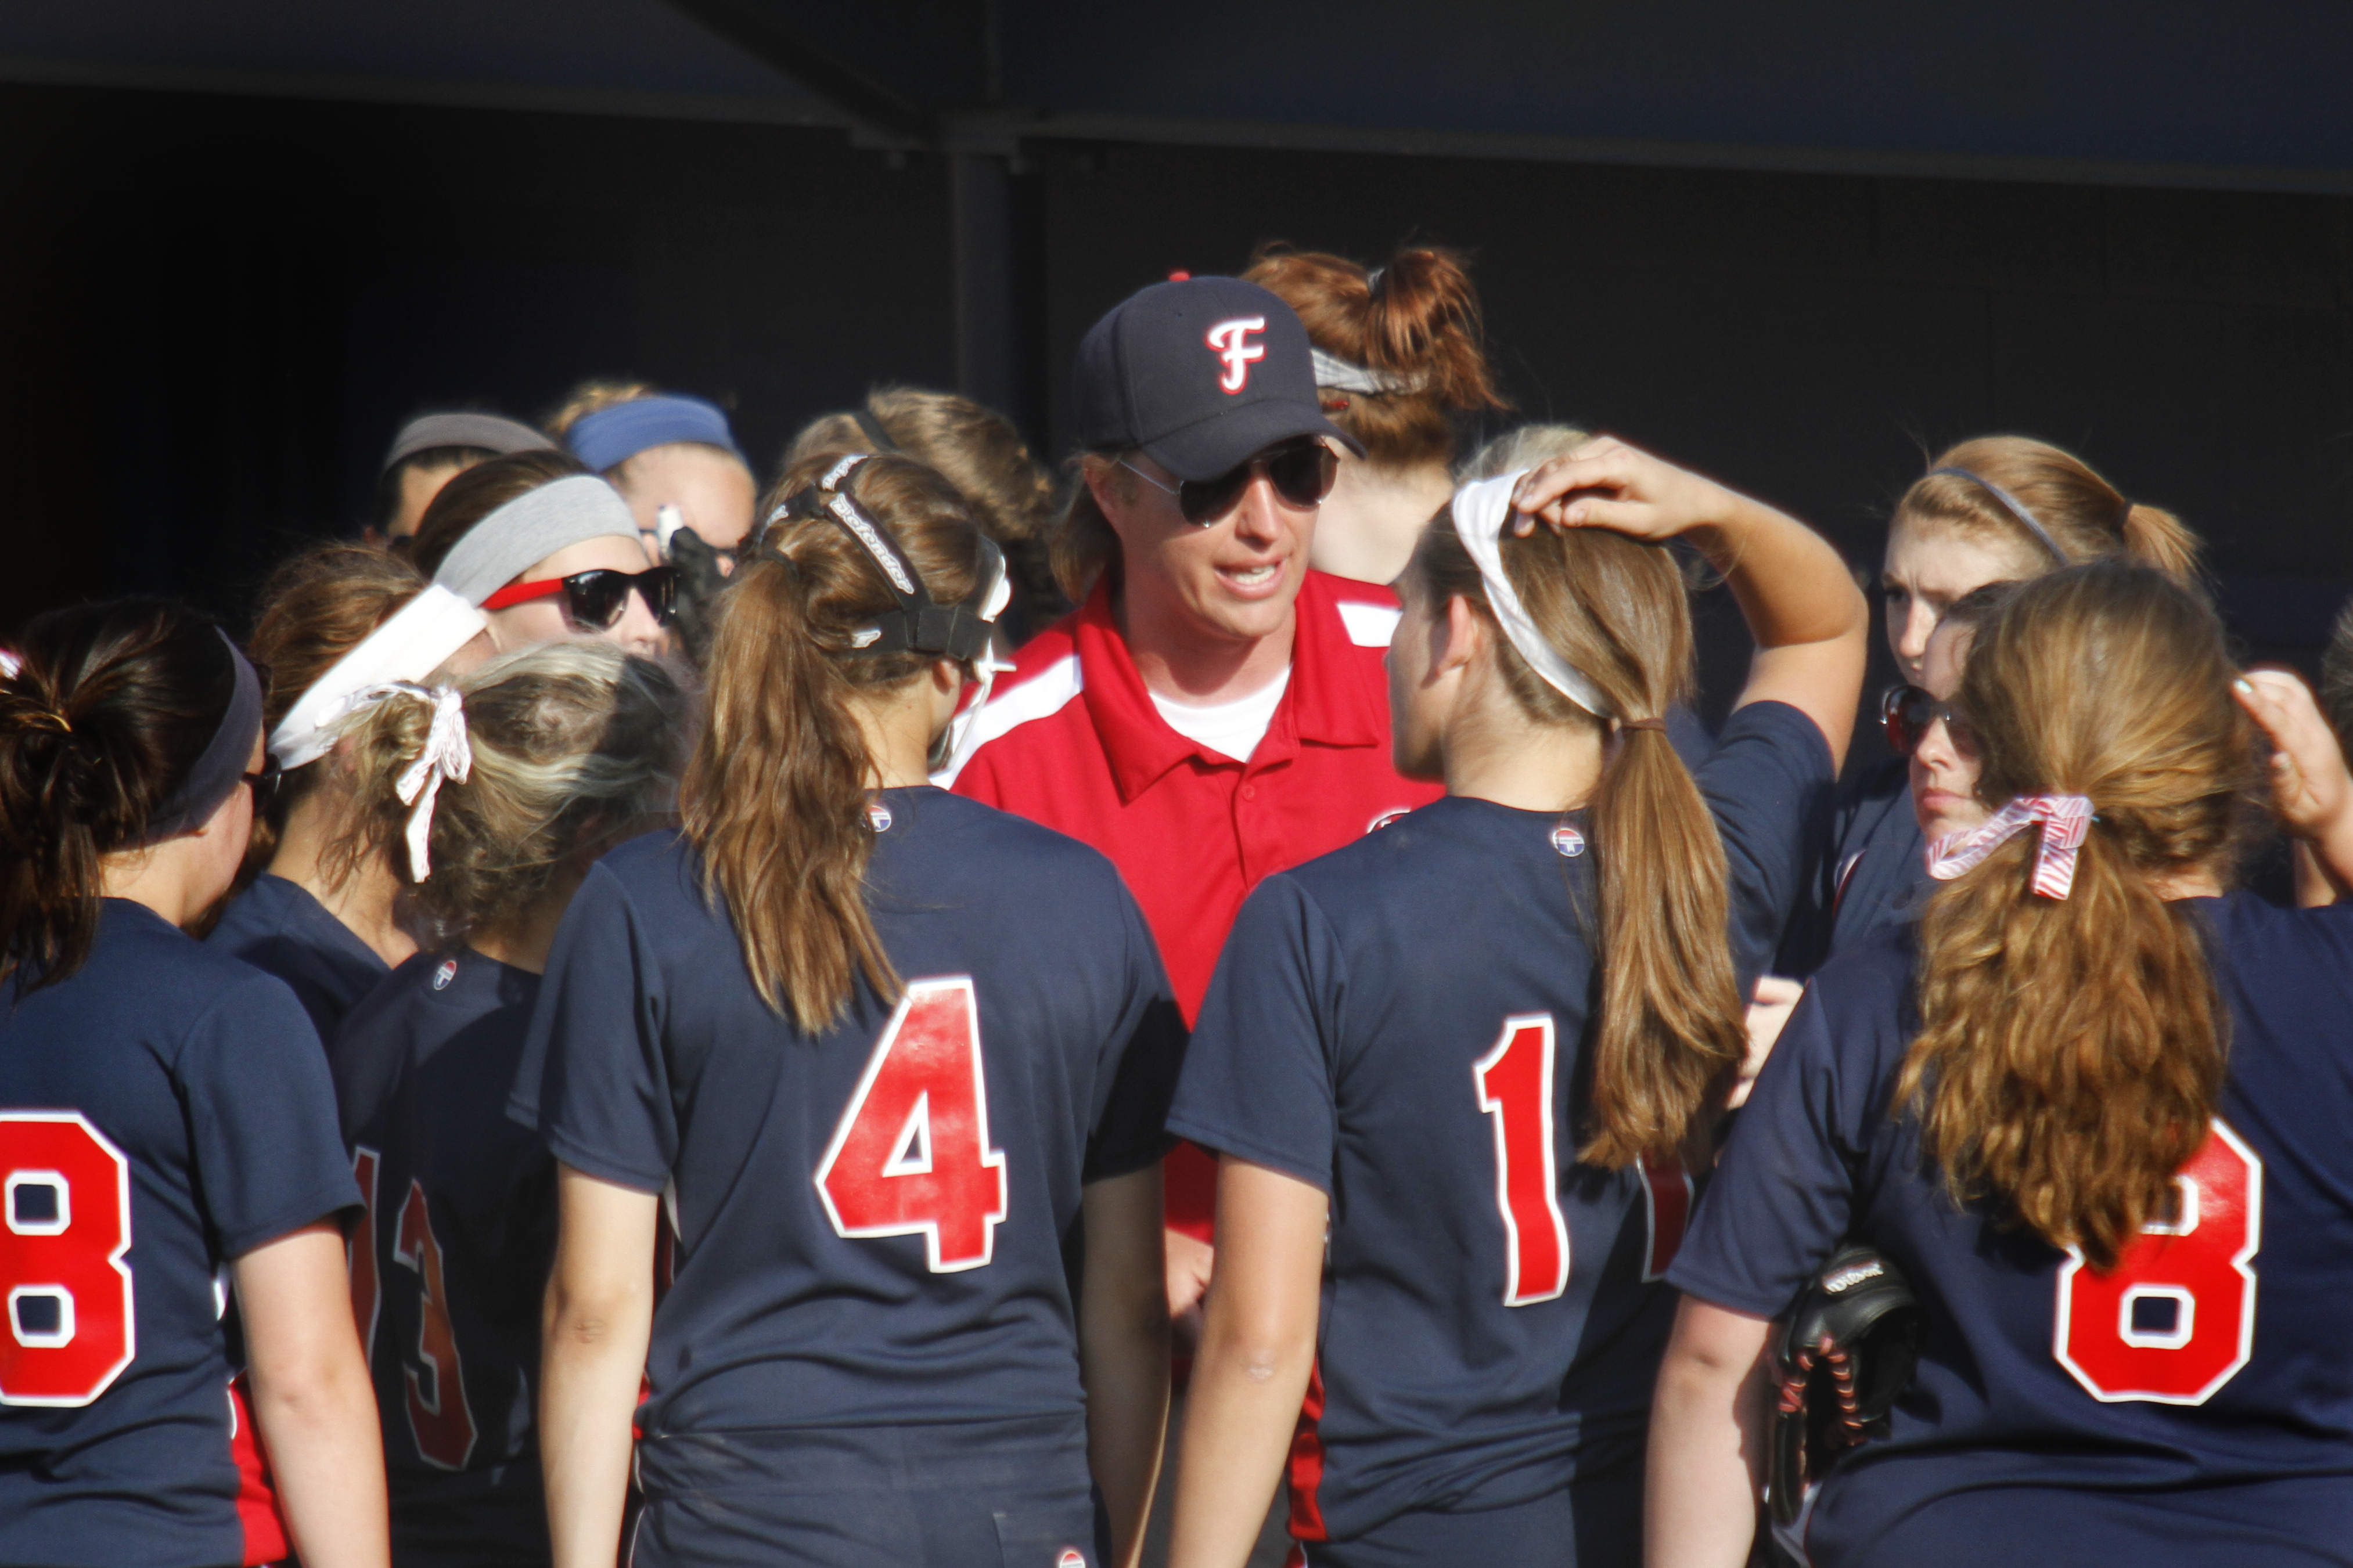 MADELYN P. HASTINGS I THE VINDICATOR

Coaches talk with the Fitch girls during their game against Medina at the University of Akron on May 30, 2013. Fitch lost to Medina 5-3.